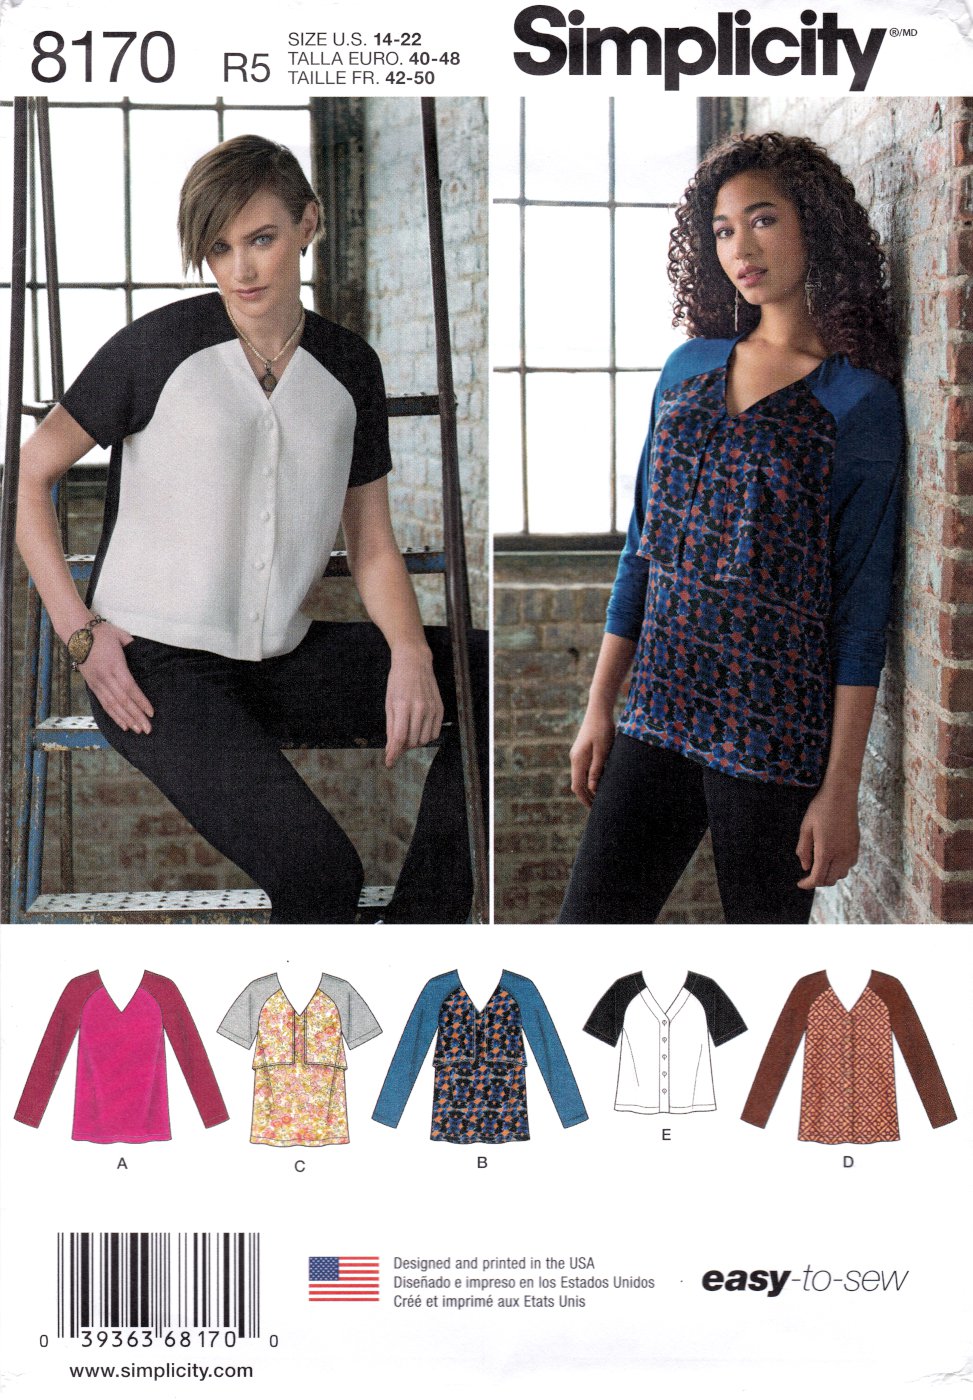 Simplicity 8170 Misses Tunic and Tops Sewing Pattern Sizes 14-22